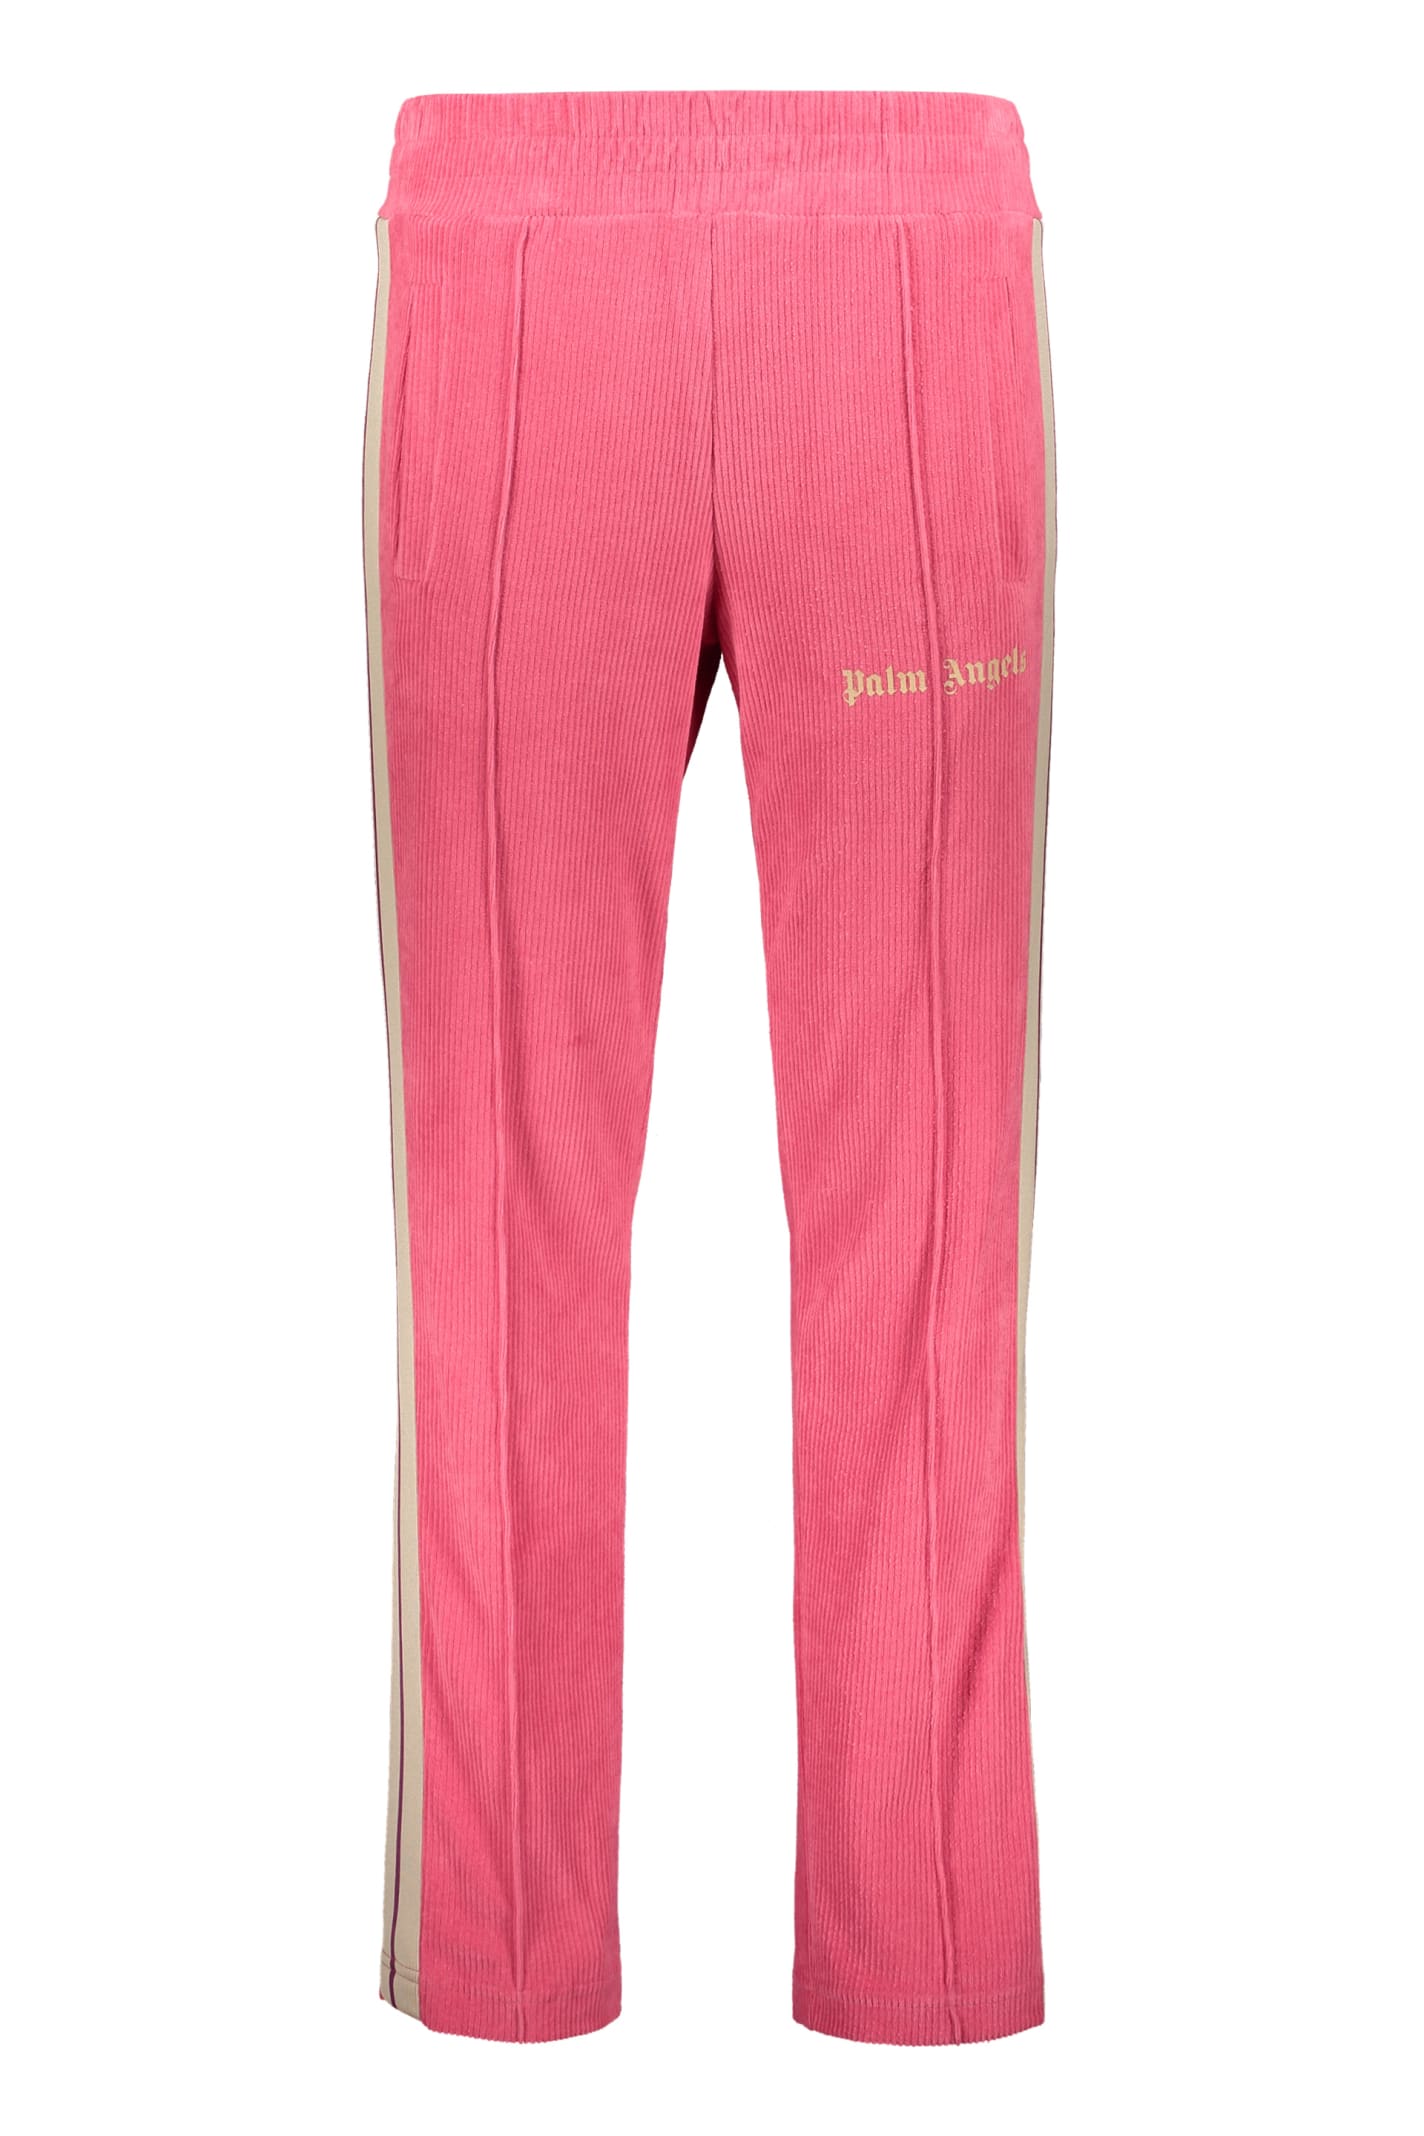 Palm Angels Corduroy Trousers